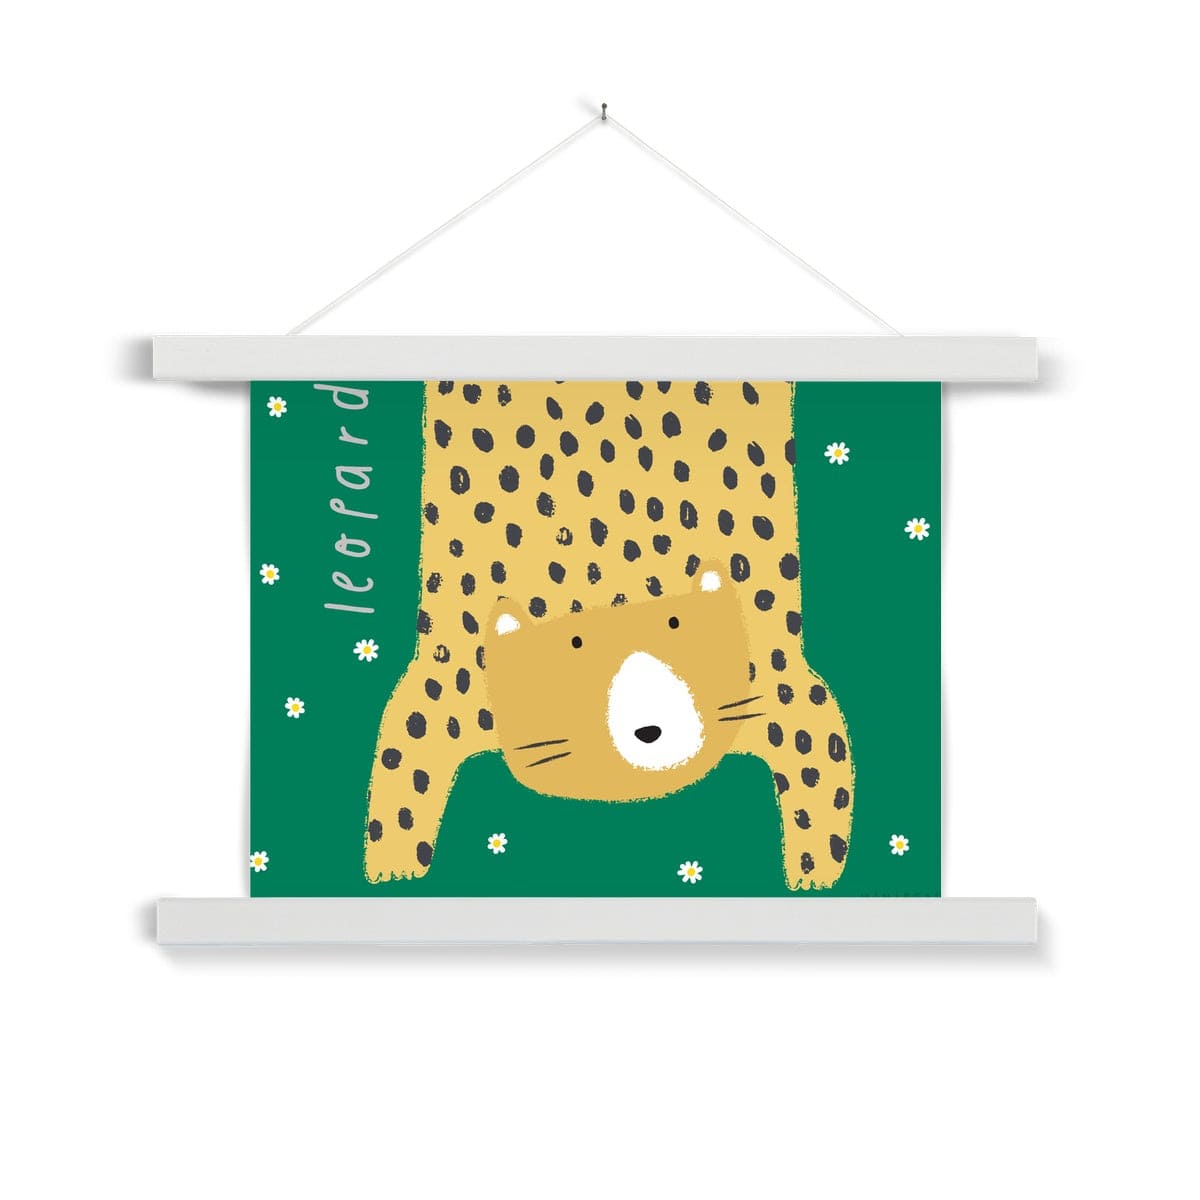 Our Leopard art print shows a hand-drawn leopard hanging down in to the picture, lifting it's head to look out at us on a green background with falling daisies, with the word leopard written alongside it, in a white wooden hanger, hanging from a nail in a white wall